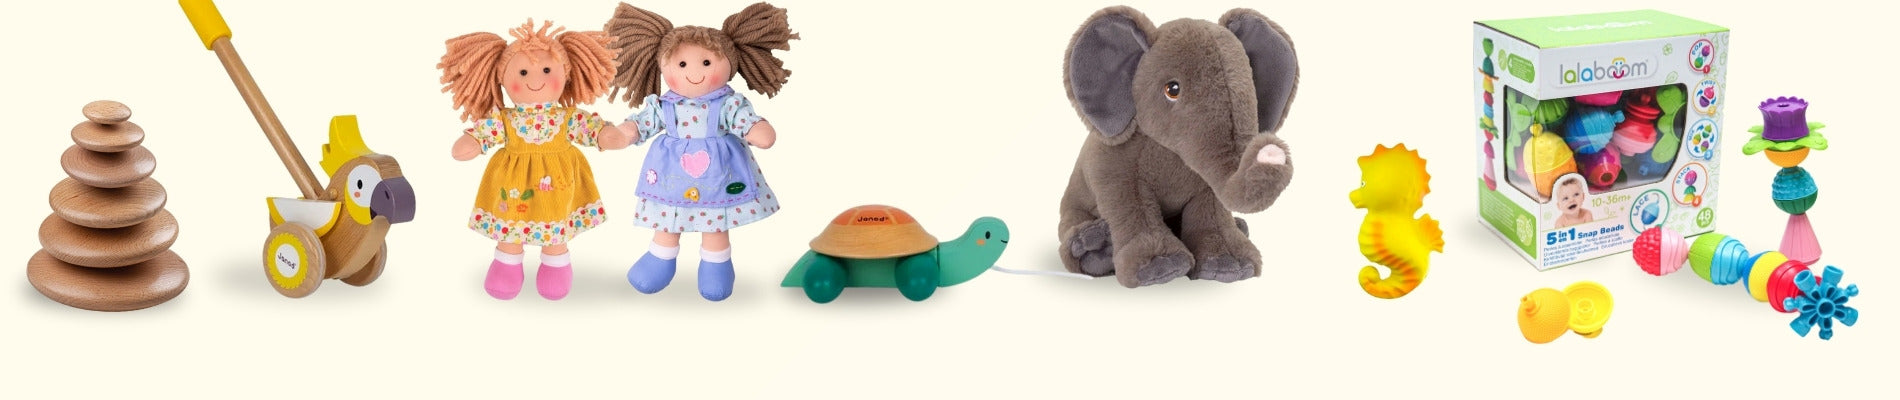 A selection of toys suitable for babies including(l-r) stacking wooden pebble, rag dolls, cuddly elephant and plastic shapes.